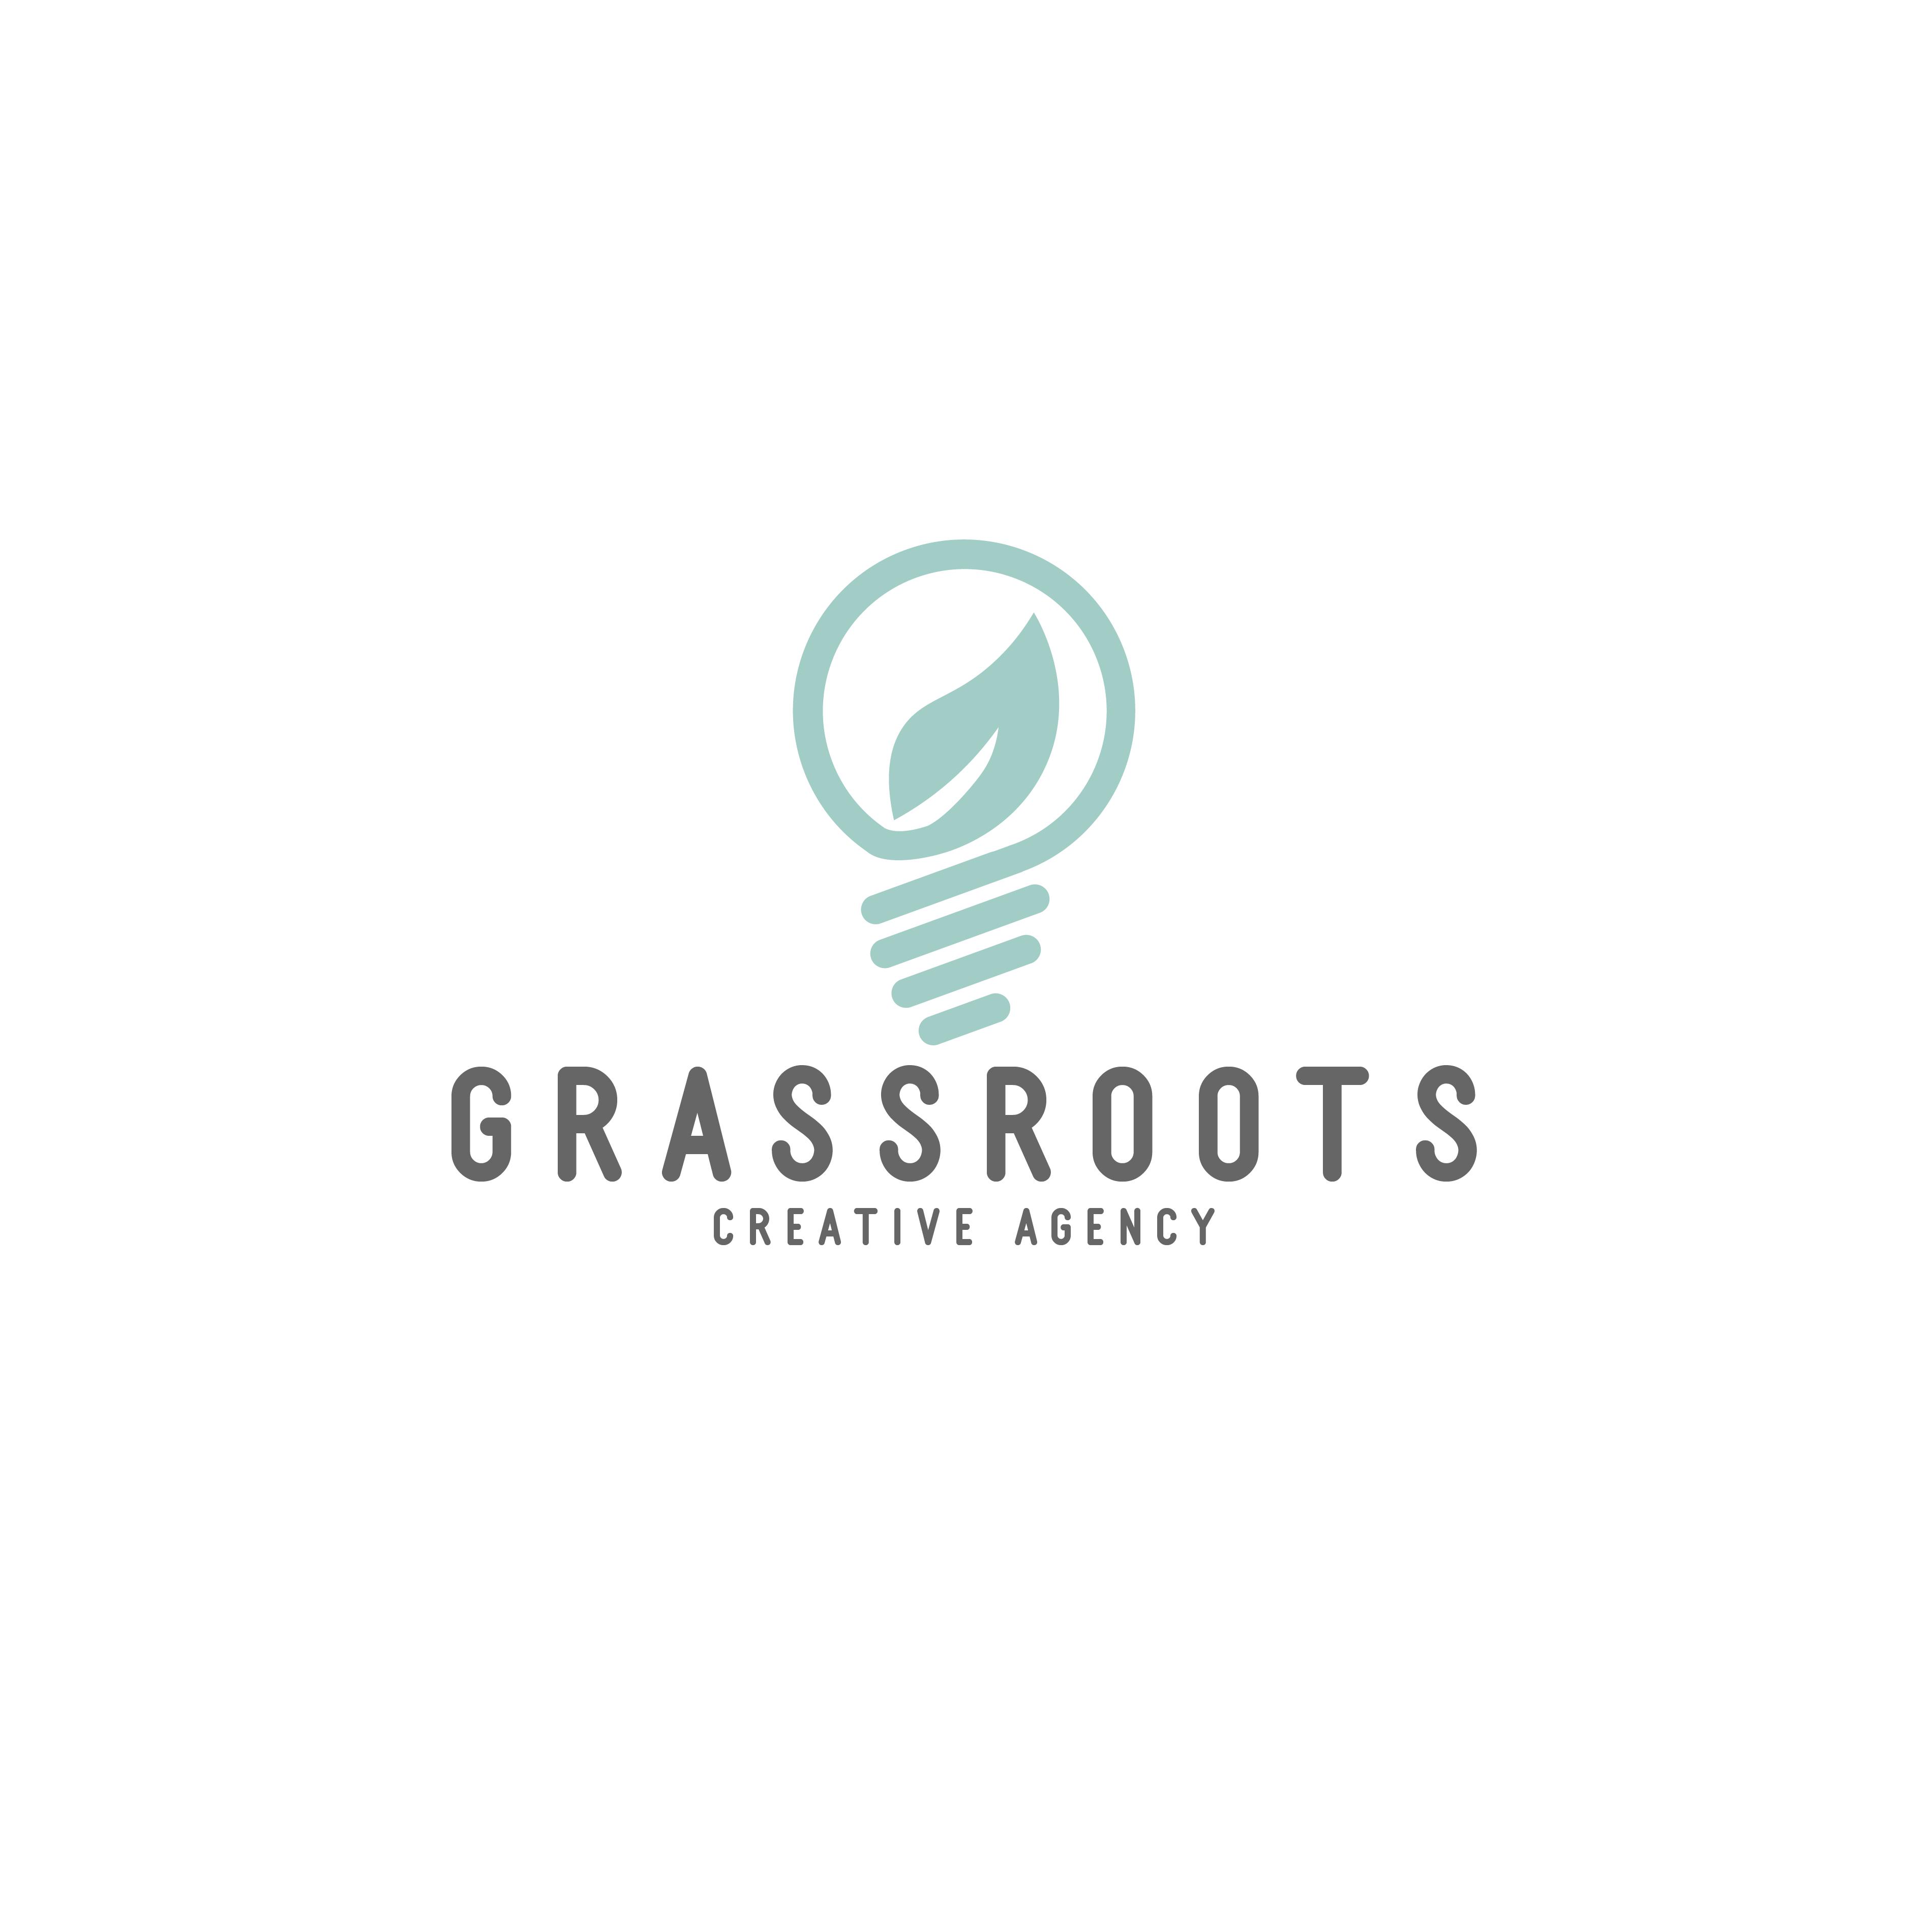 Grassroots Creative Agency profile on Qualified.One